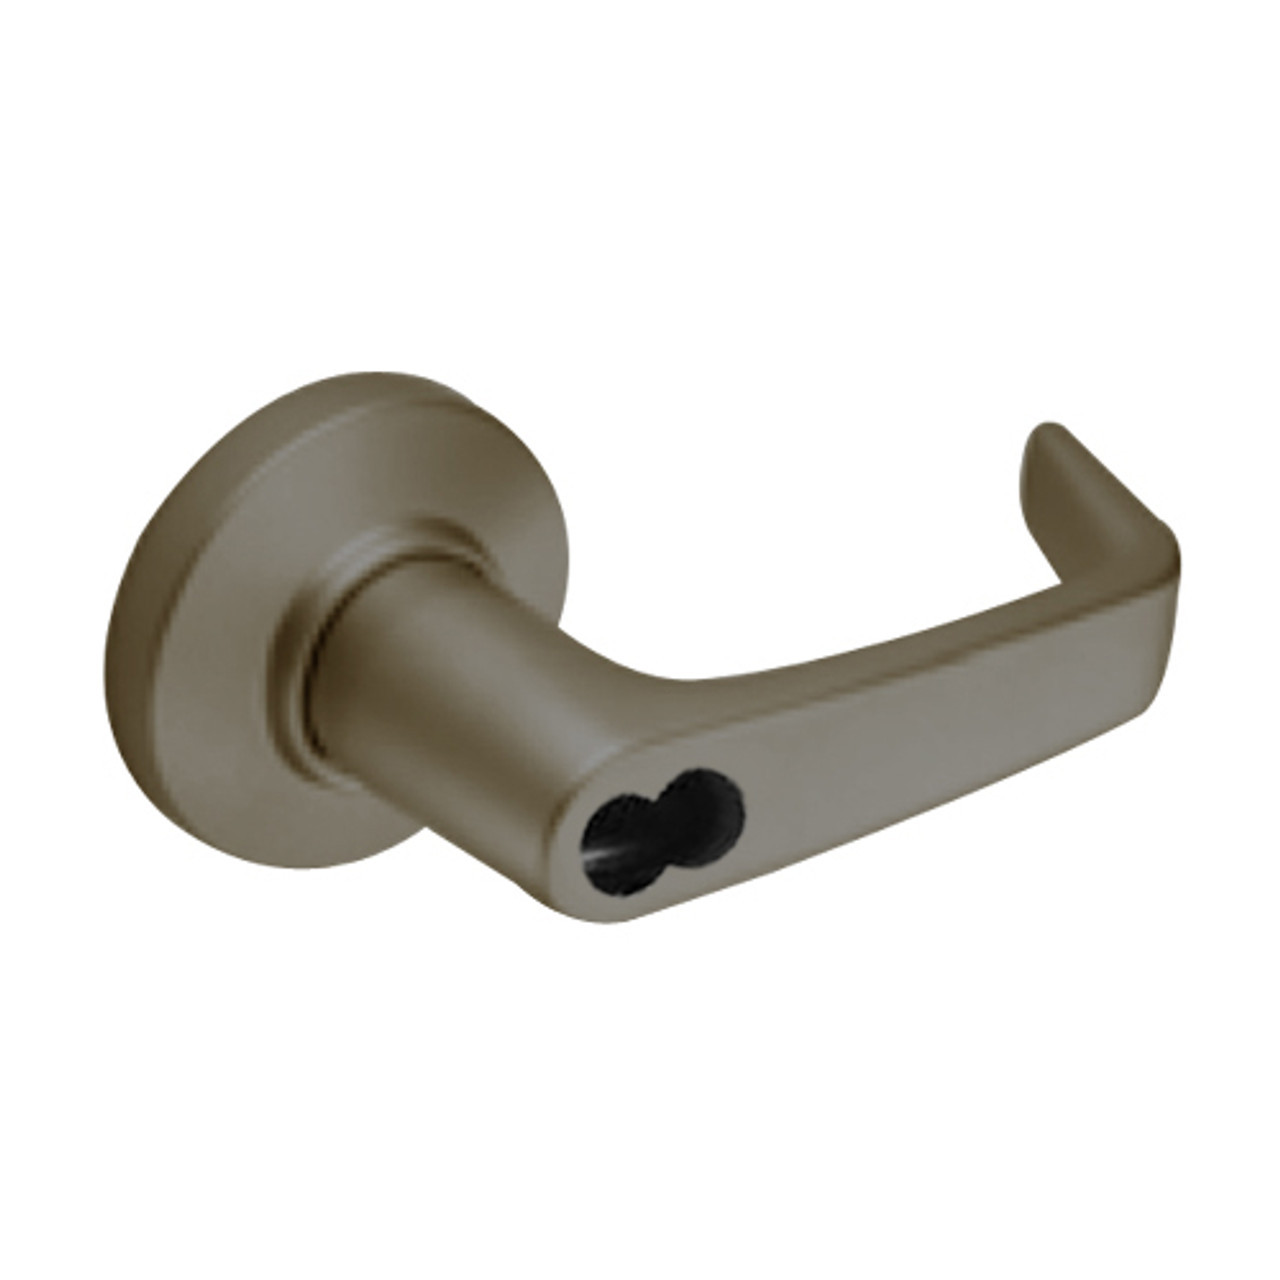 9K37E15CS3613LM Best 9K Series Service Station Cylindrical Lever Locks with Contour Angle with Return Lever Design Accept 7 Pin Best Core in Oil Rubbed Bronze